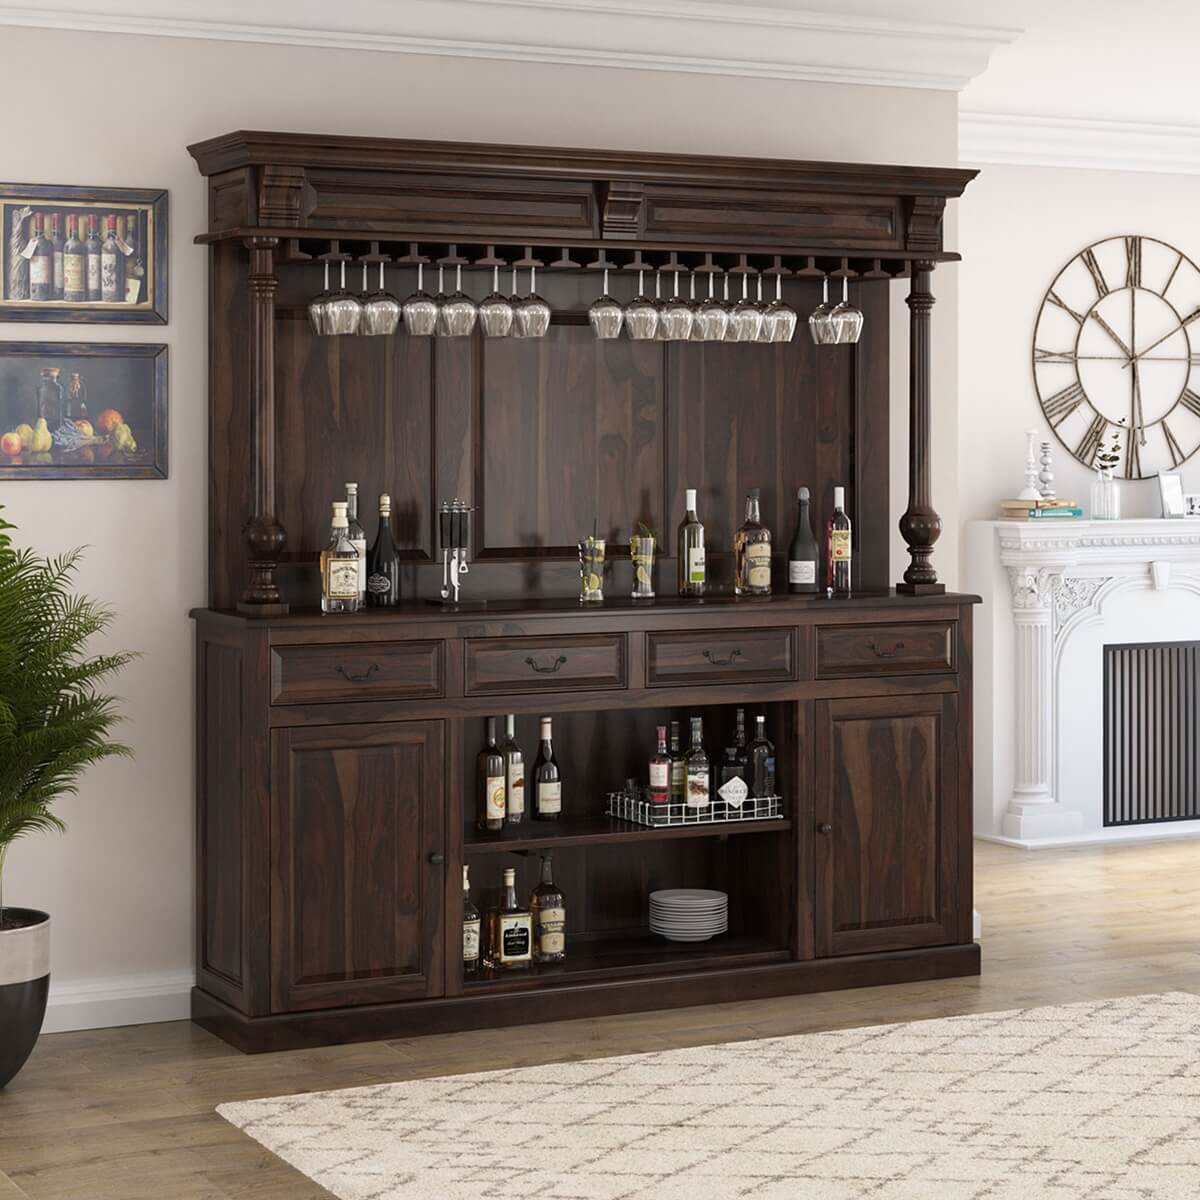 Coffee Bar Wine Bar RISE AND WINE! Cabinet Hutch Dining Room Kitchen